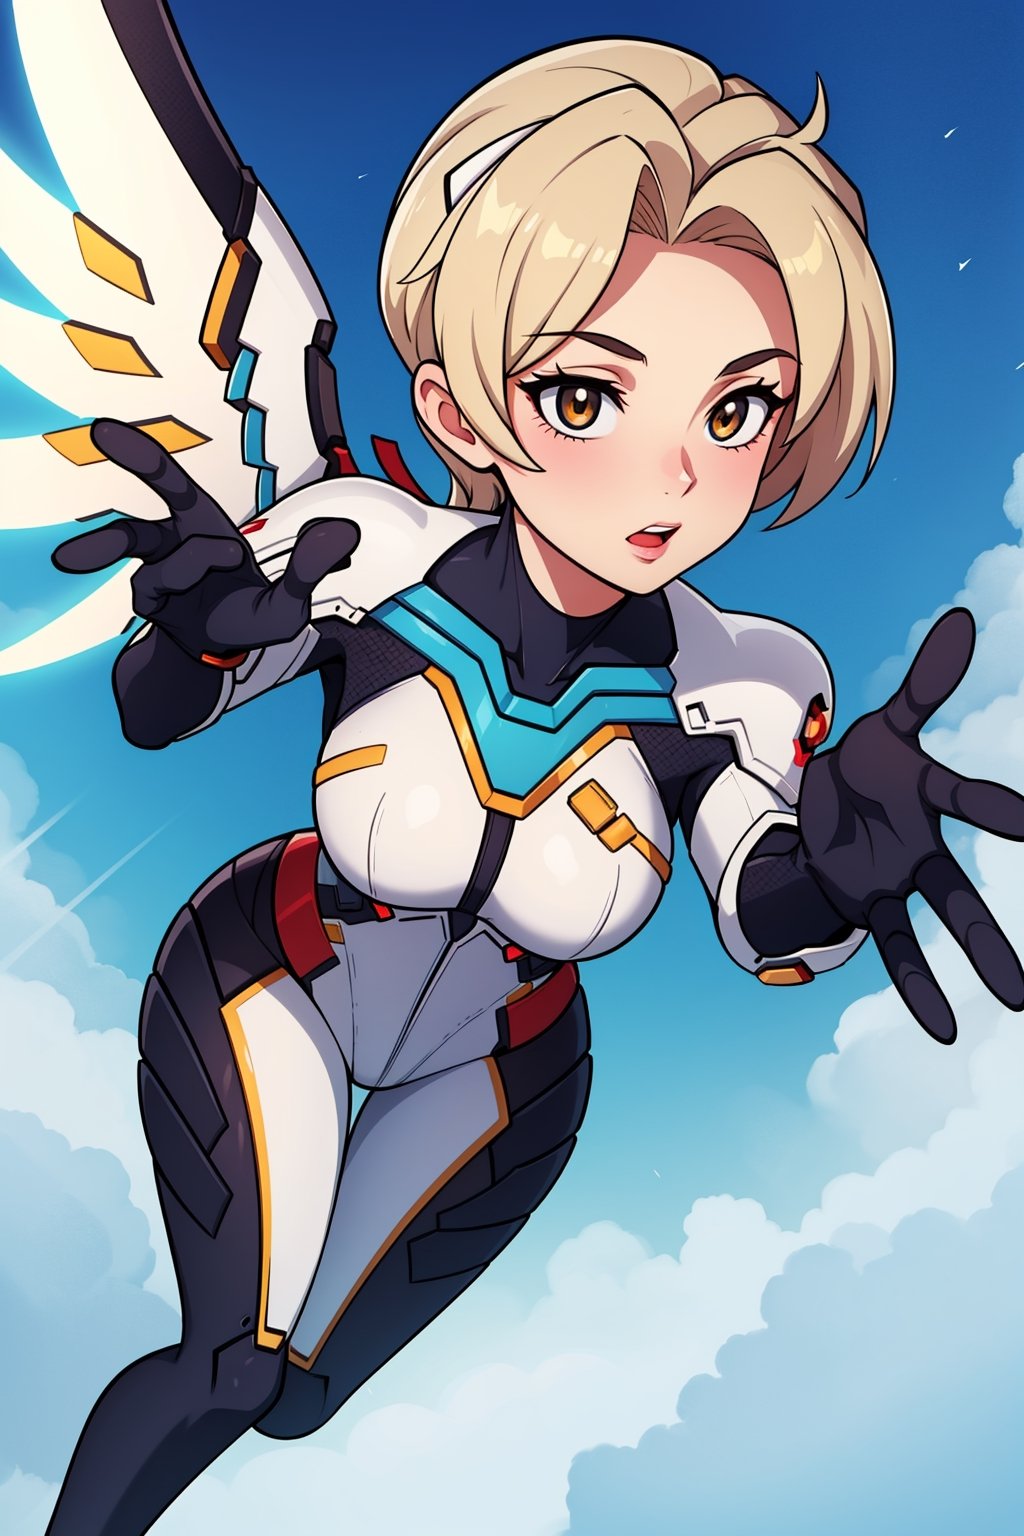 Mercy from overwatch, flying in sky, glorious